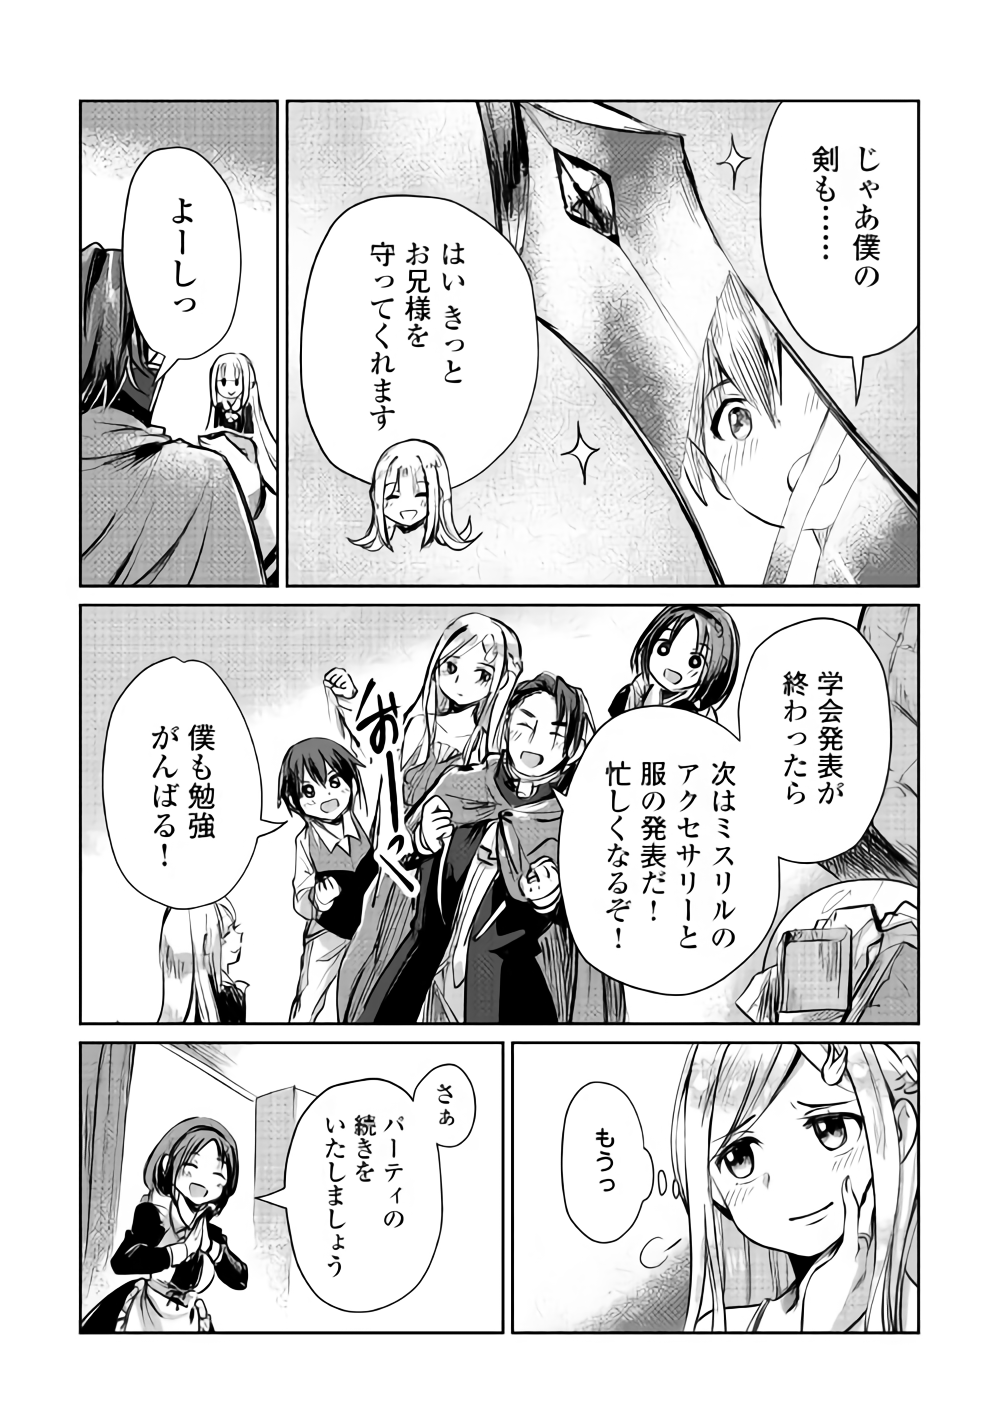 The Former Structural Researcher’s Story of Otherworldly Adventure 第7話 - Page 33